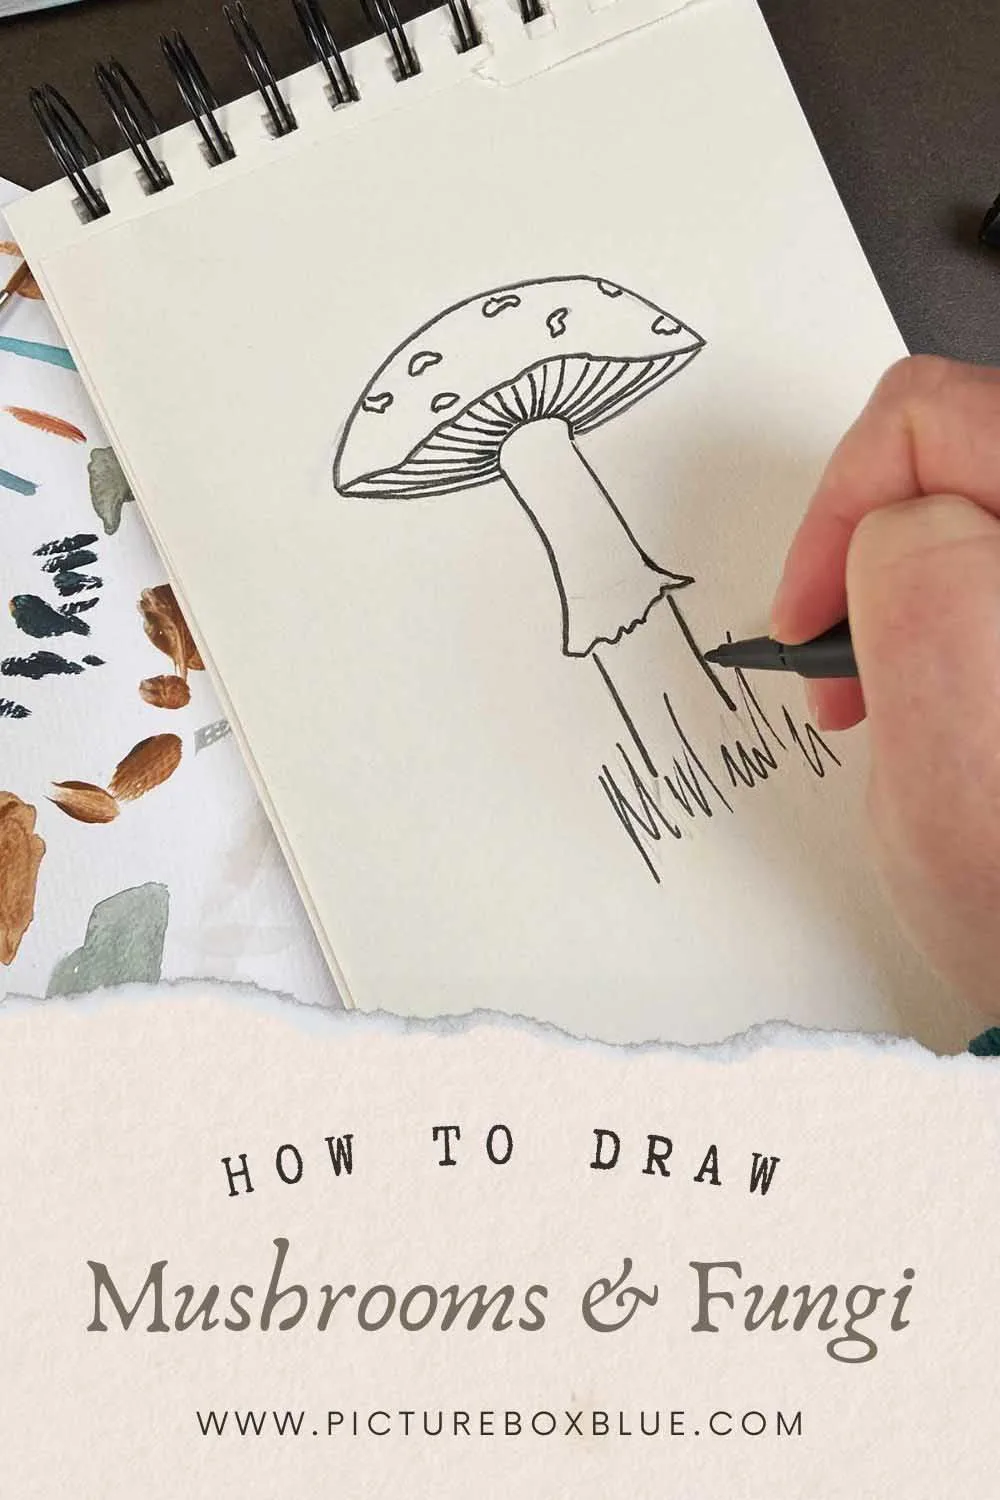 How to draw toadstools, mushrooms and fungi